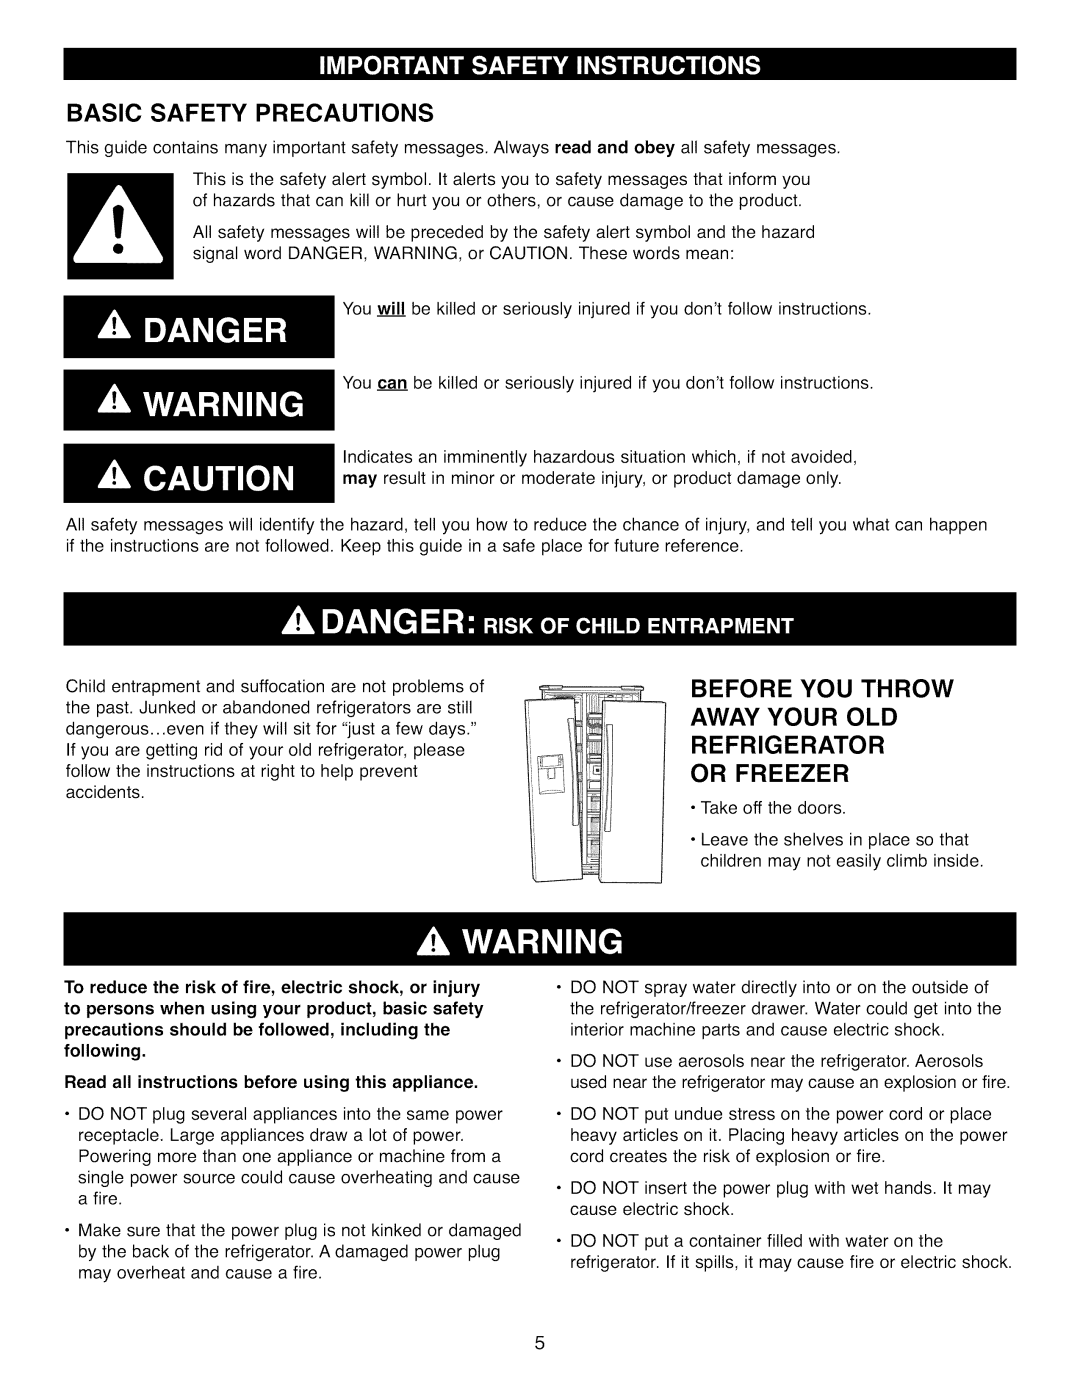 Kenmore 41009, 41003, 41002 manual Basic Safety Precautions, Before You Throw Away Your Old Refrigerator, Or Freezer 